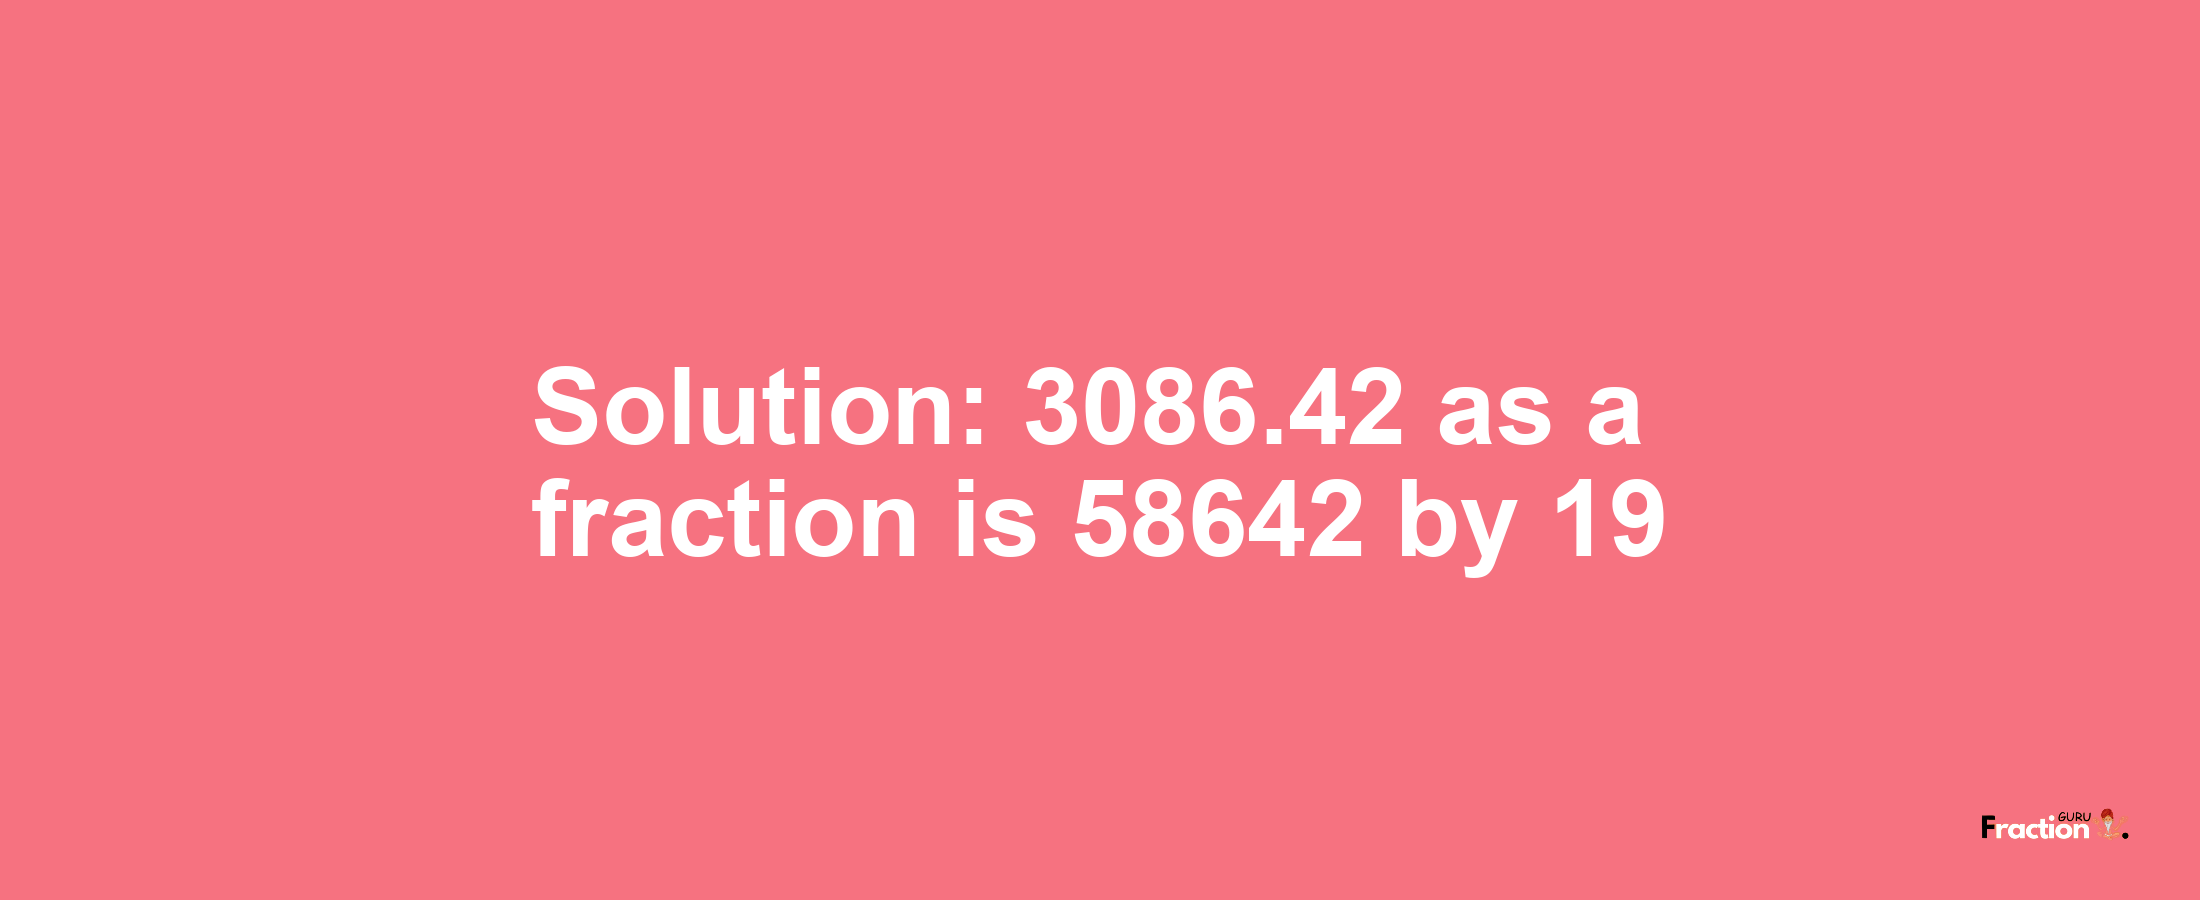 Solution:3086.42 as a fraction is 58642/19